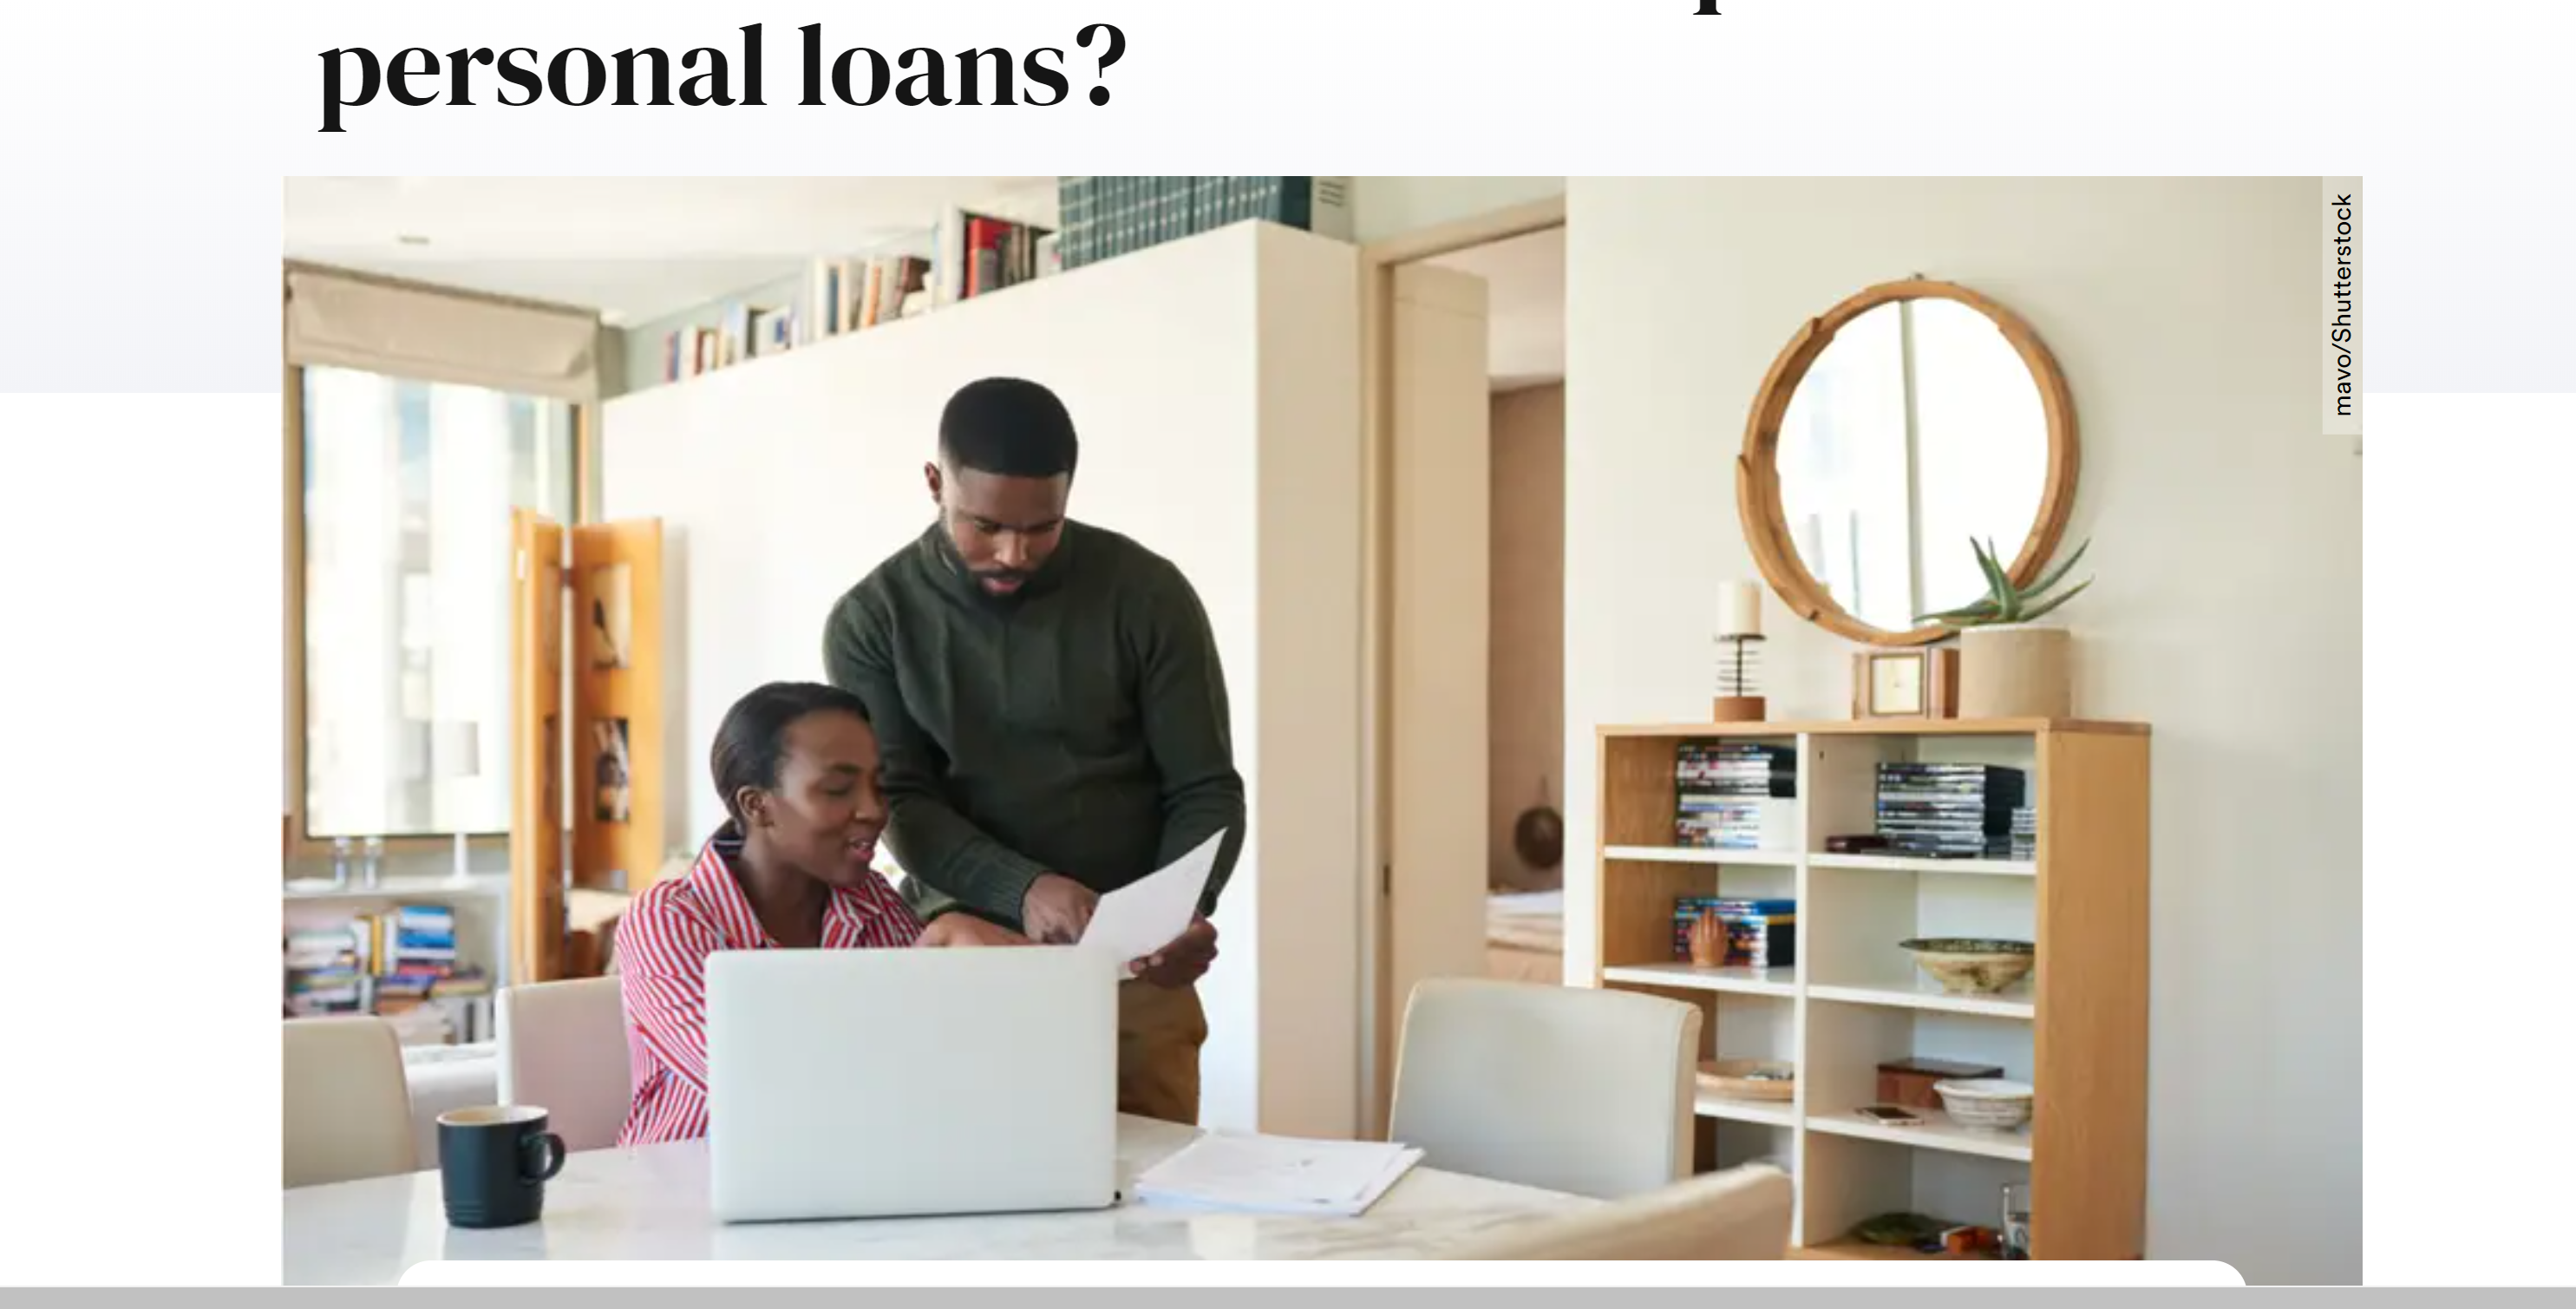 Loan - Requirements from borrower when applying for a loan